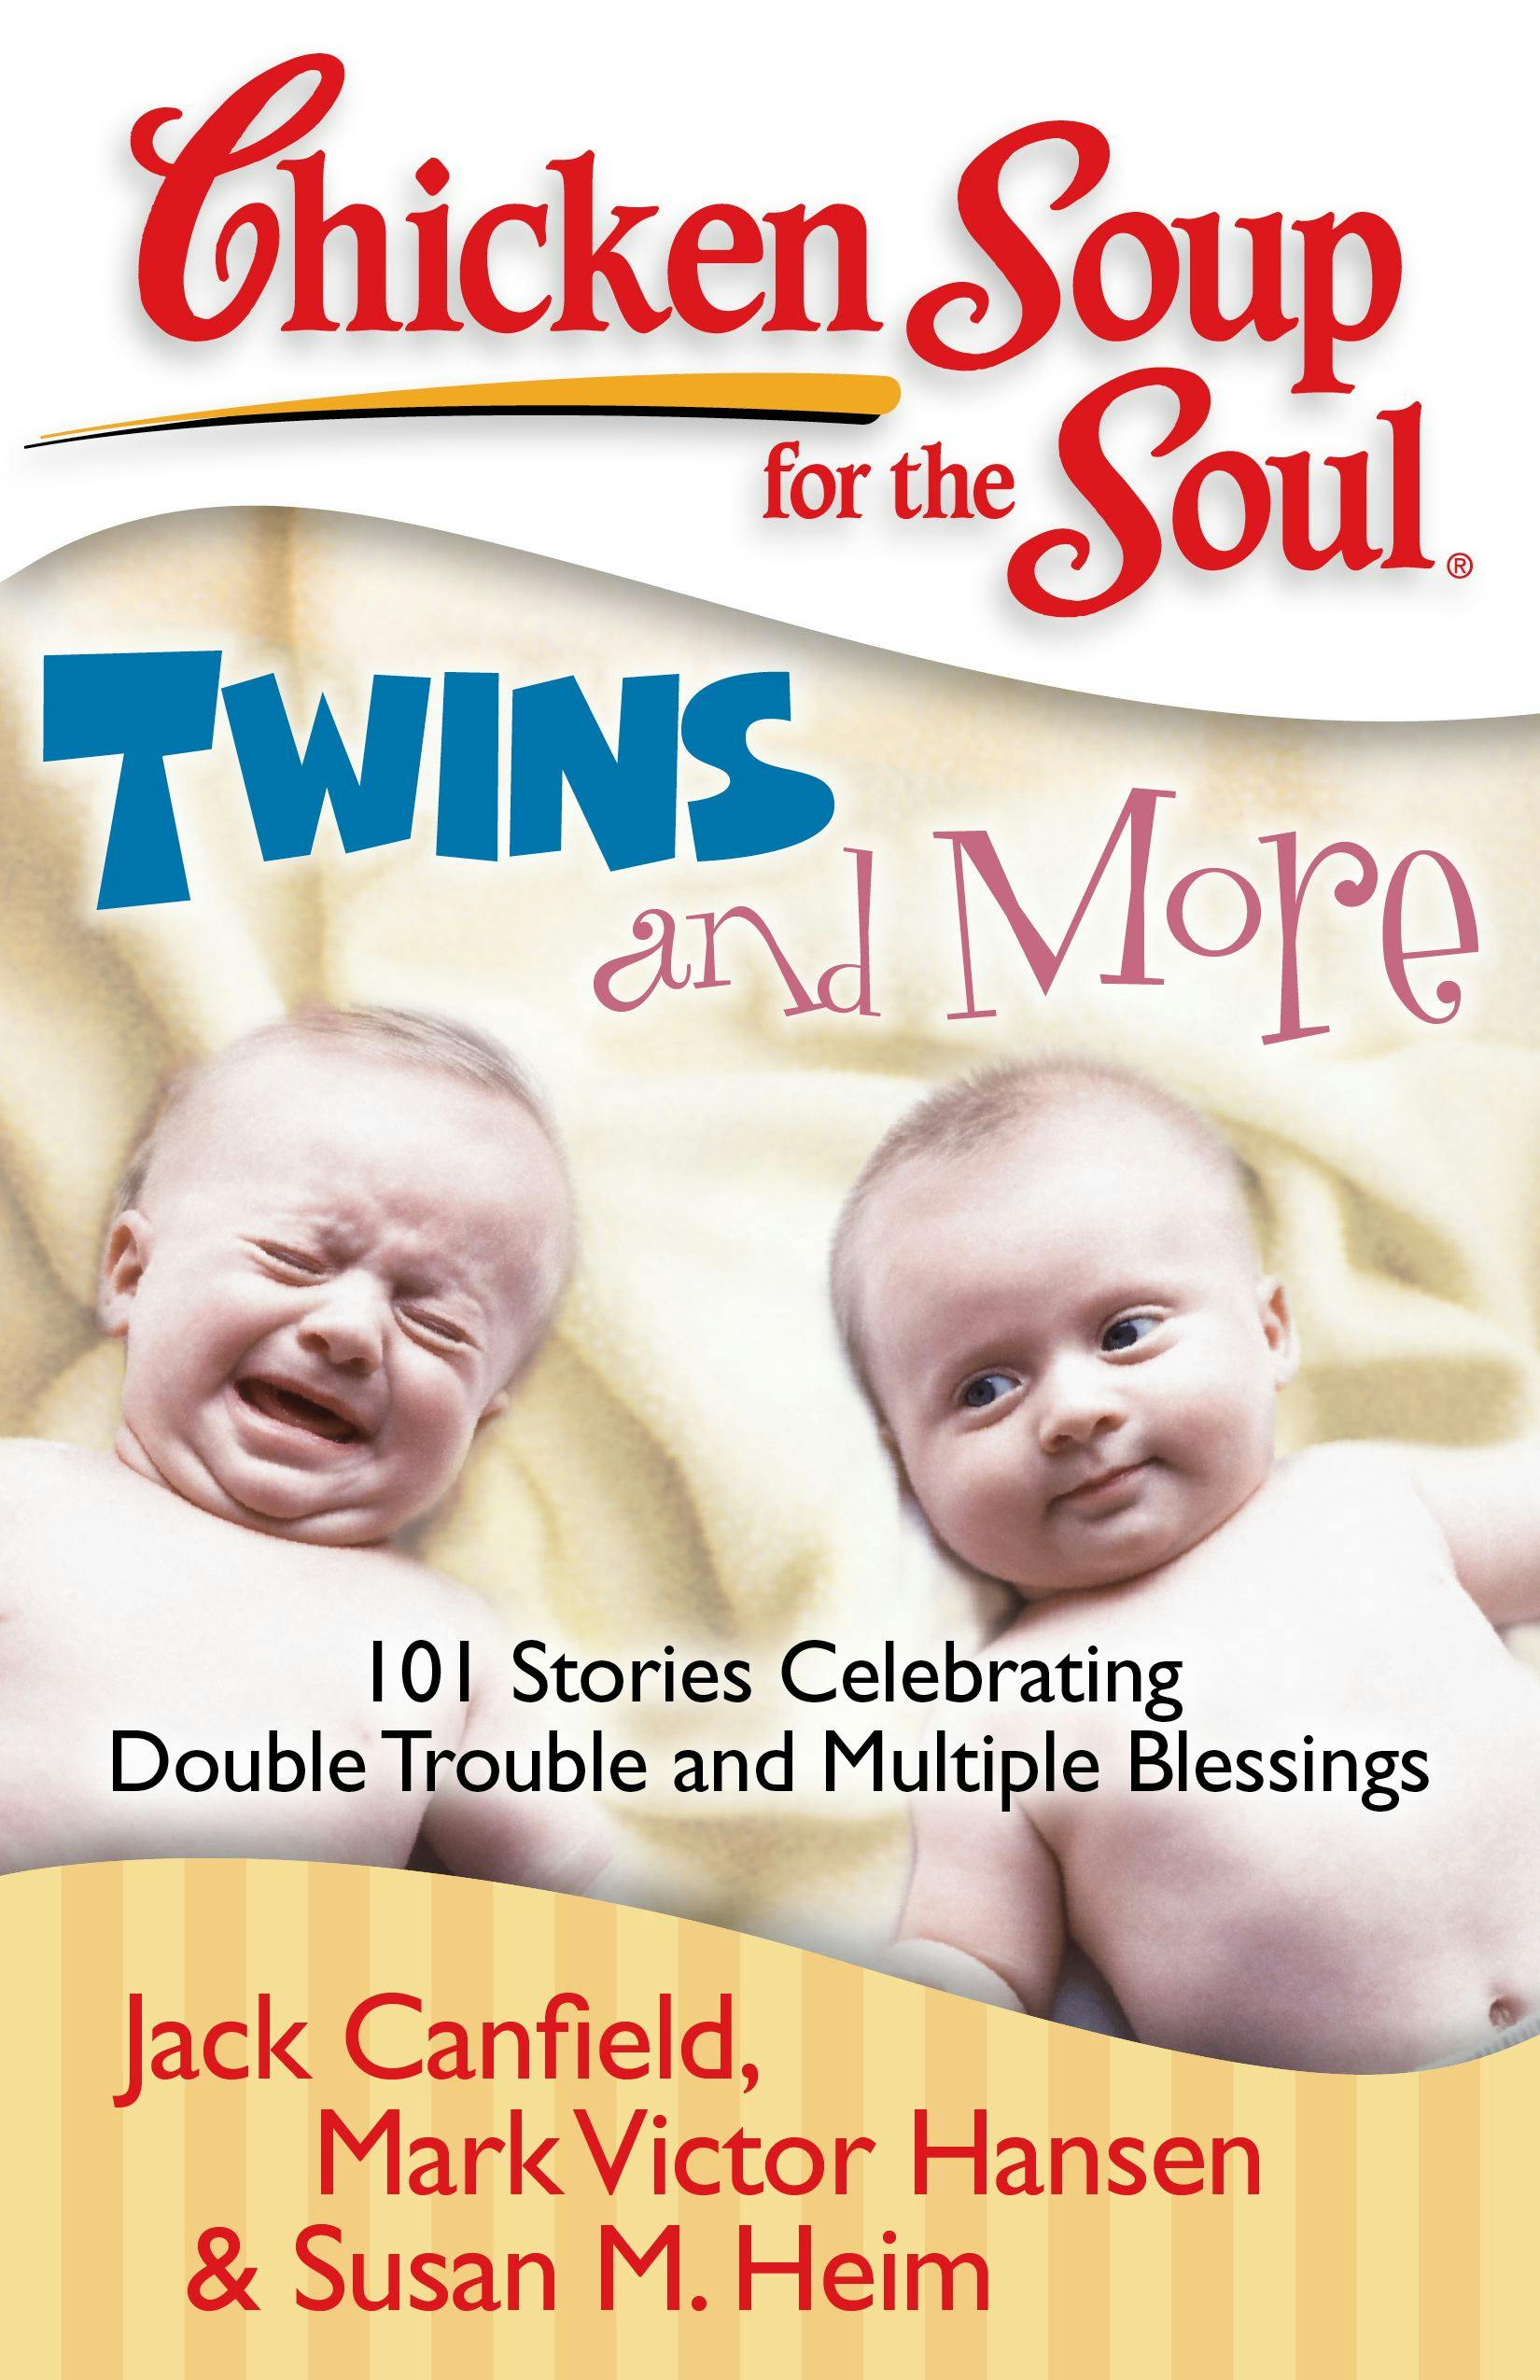 Chicken Soup for the Soul: Twins and More: 101 Stories Celebrating Double Trouble and Multiple Blessings - Mark Victor Hansen, Susan M. Heim, Jack Canfield